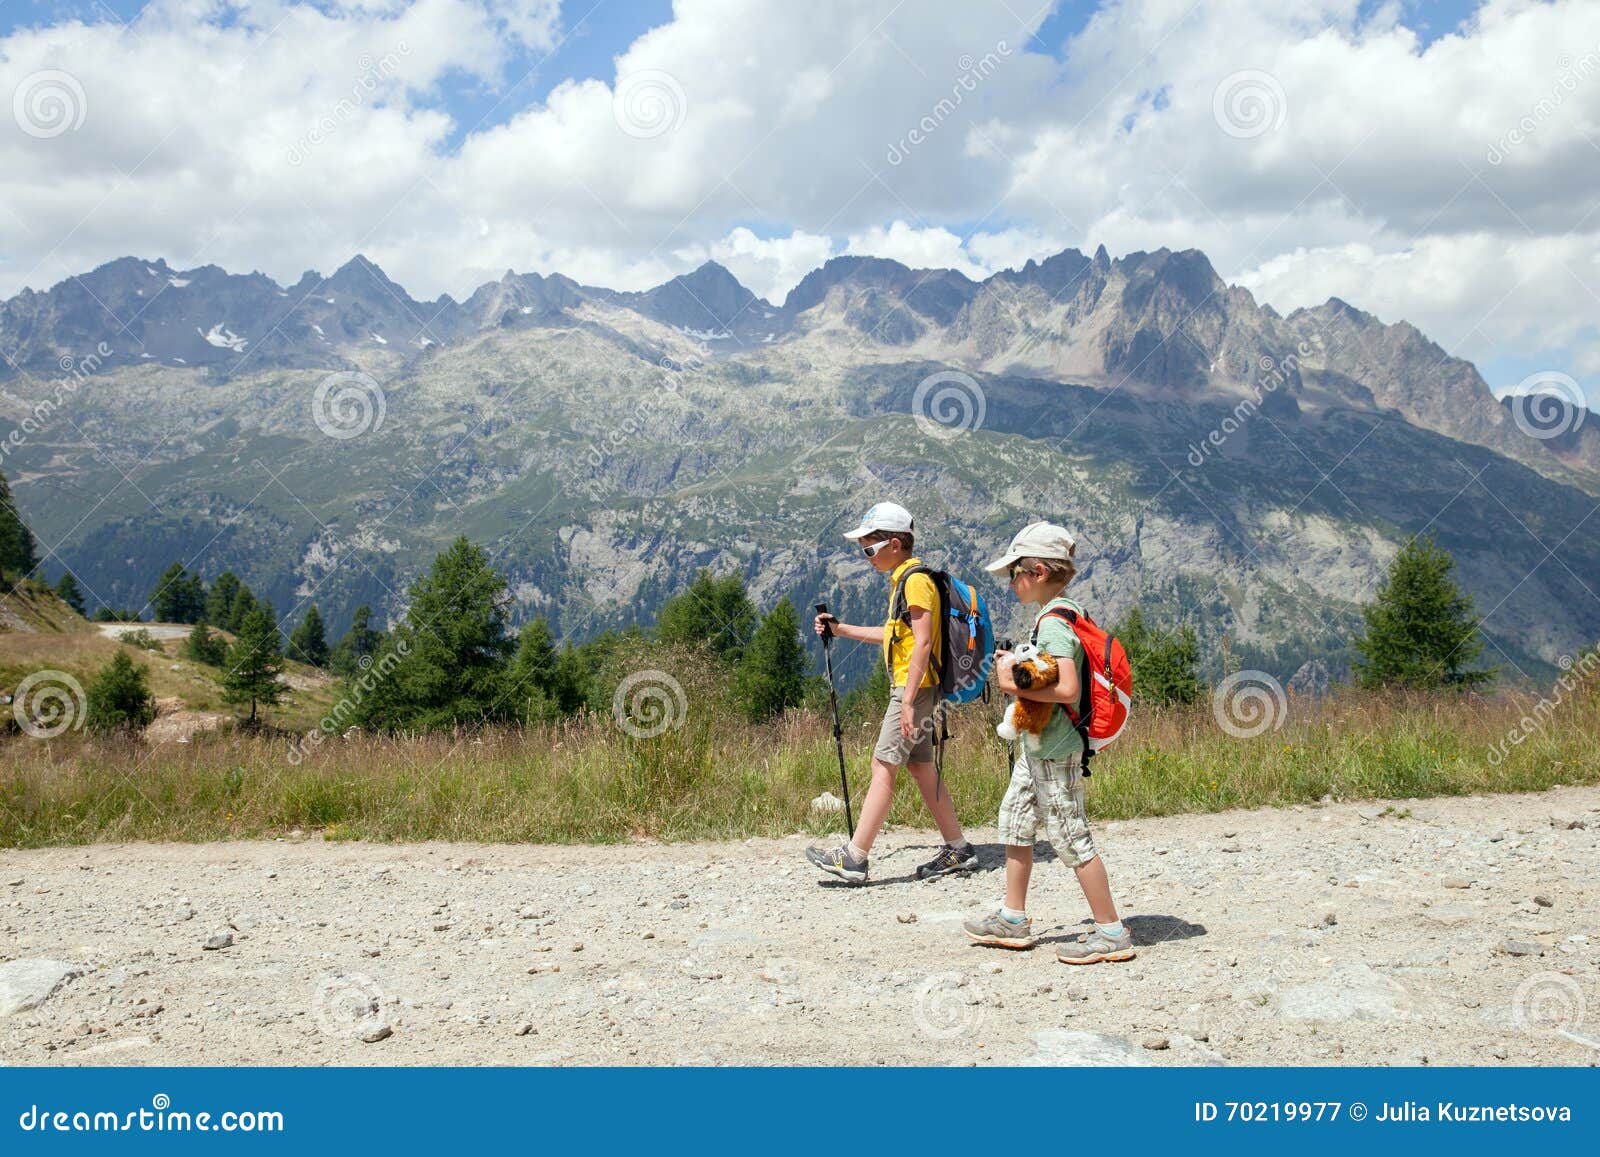 two bays walk on ground path in summer mountains